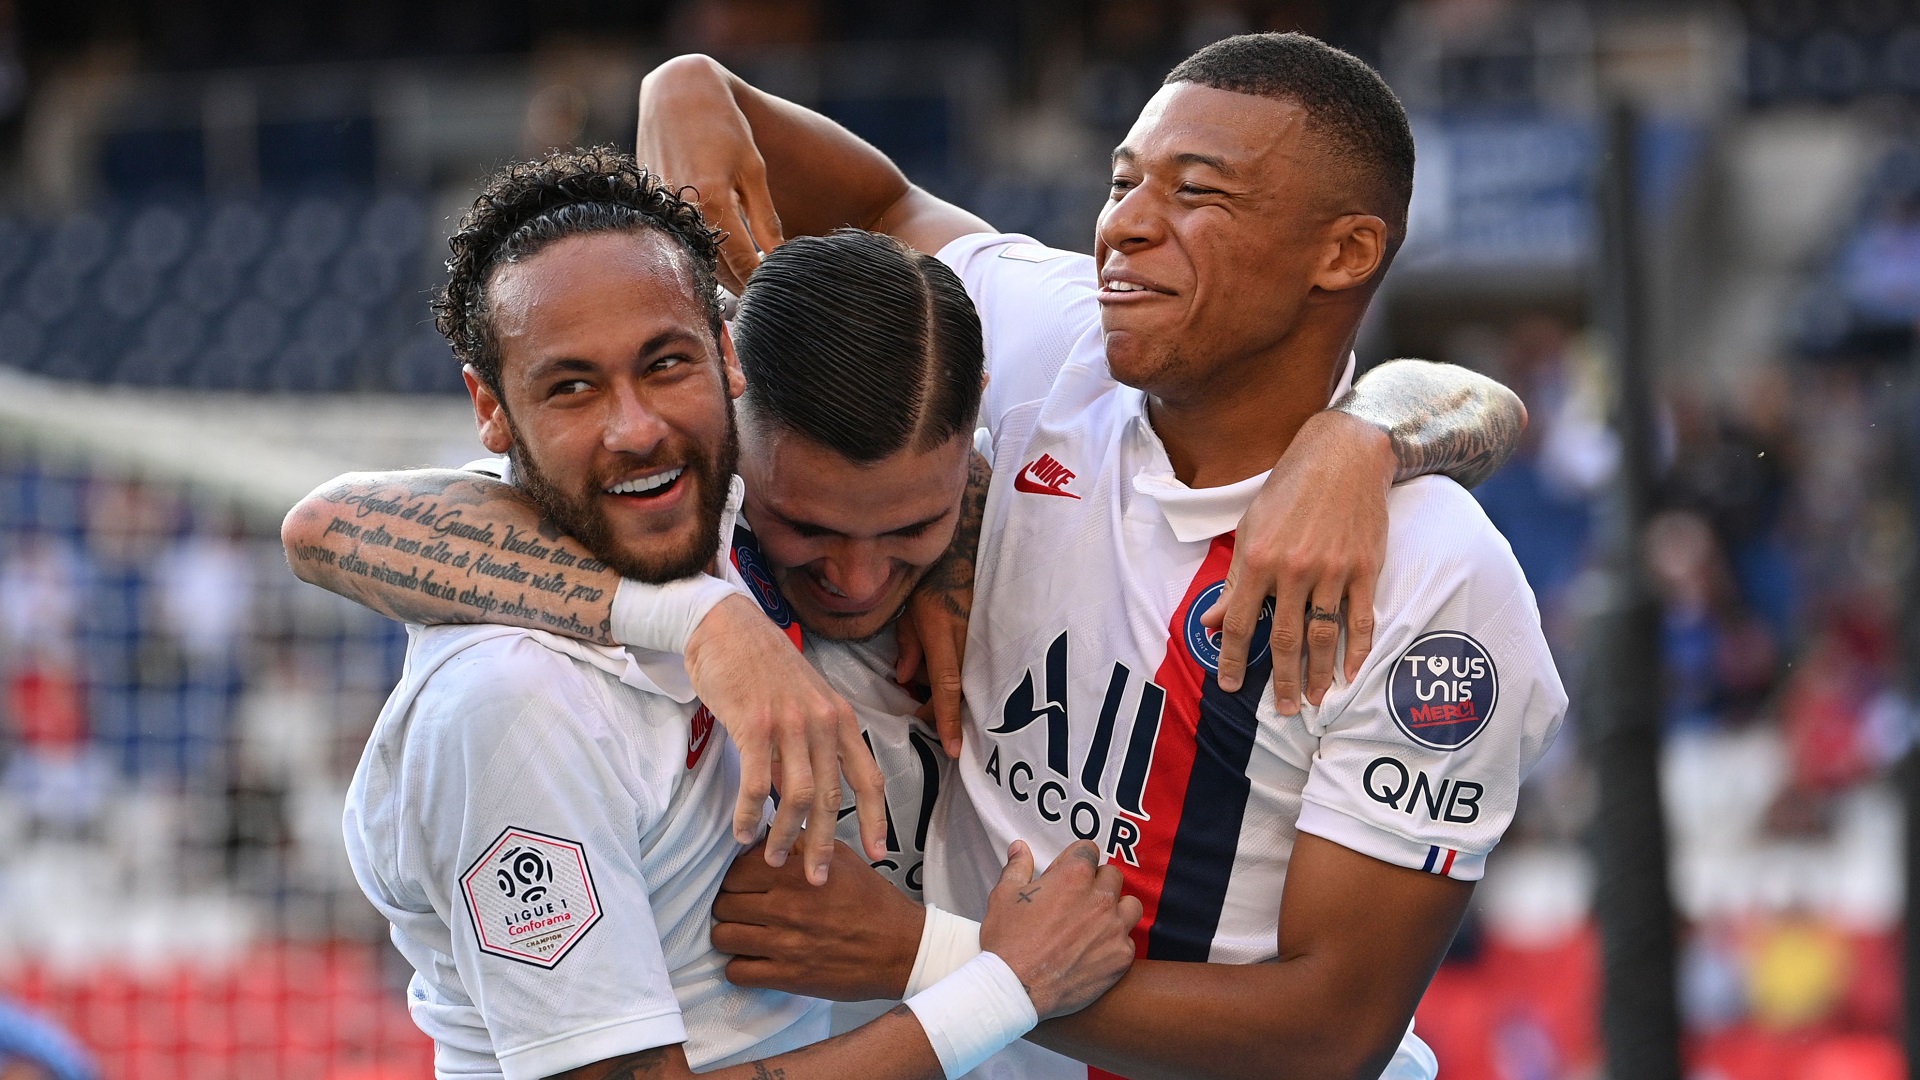 Neymar and Mbappe are the perfect team-mates, says PSG star Icardi